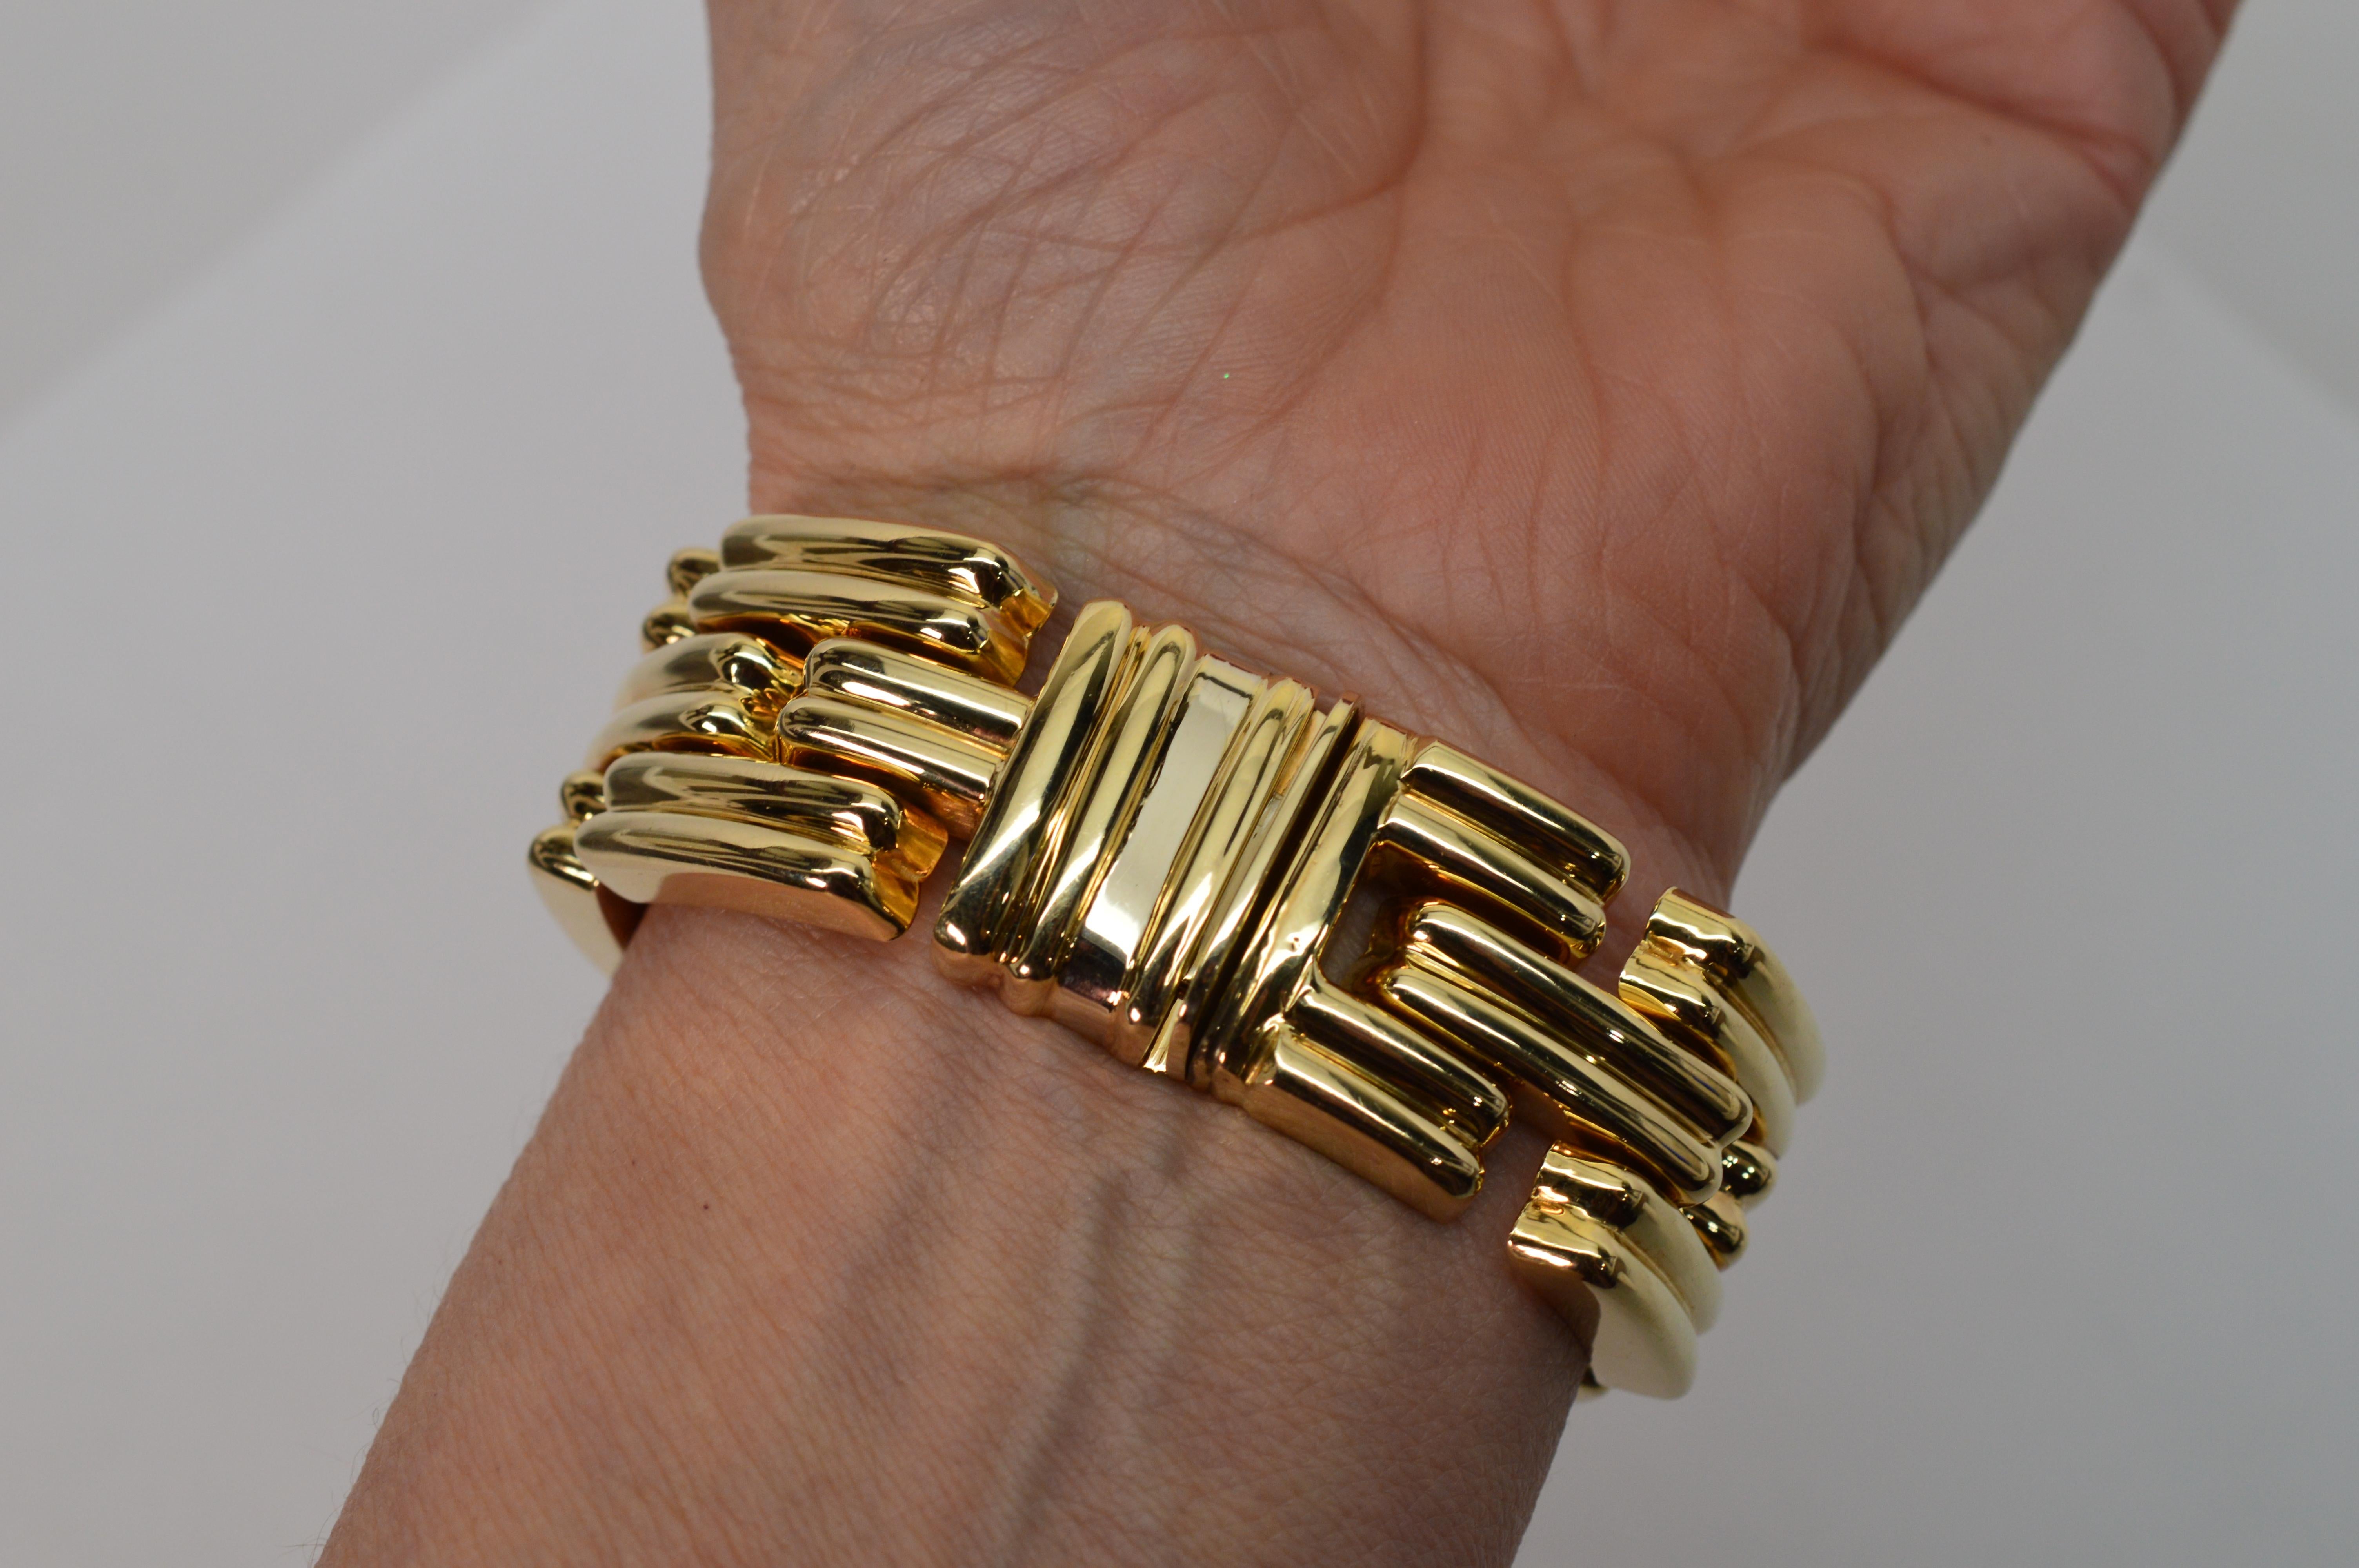 Italian Made Retro Style Yellow Gold Link Bracelet For Sale 5